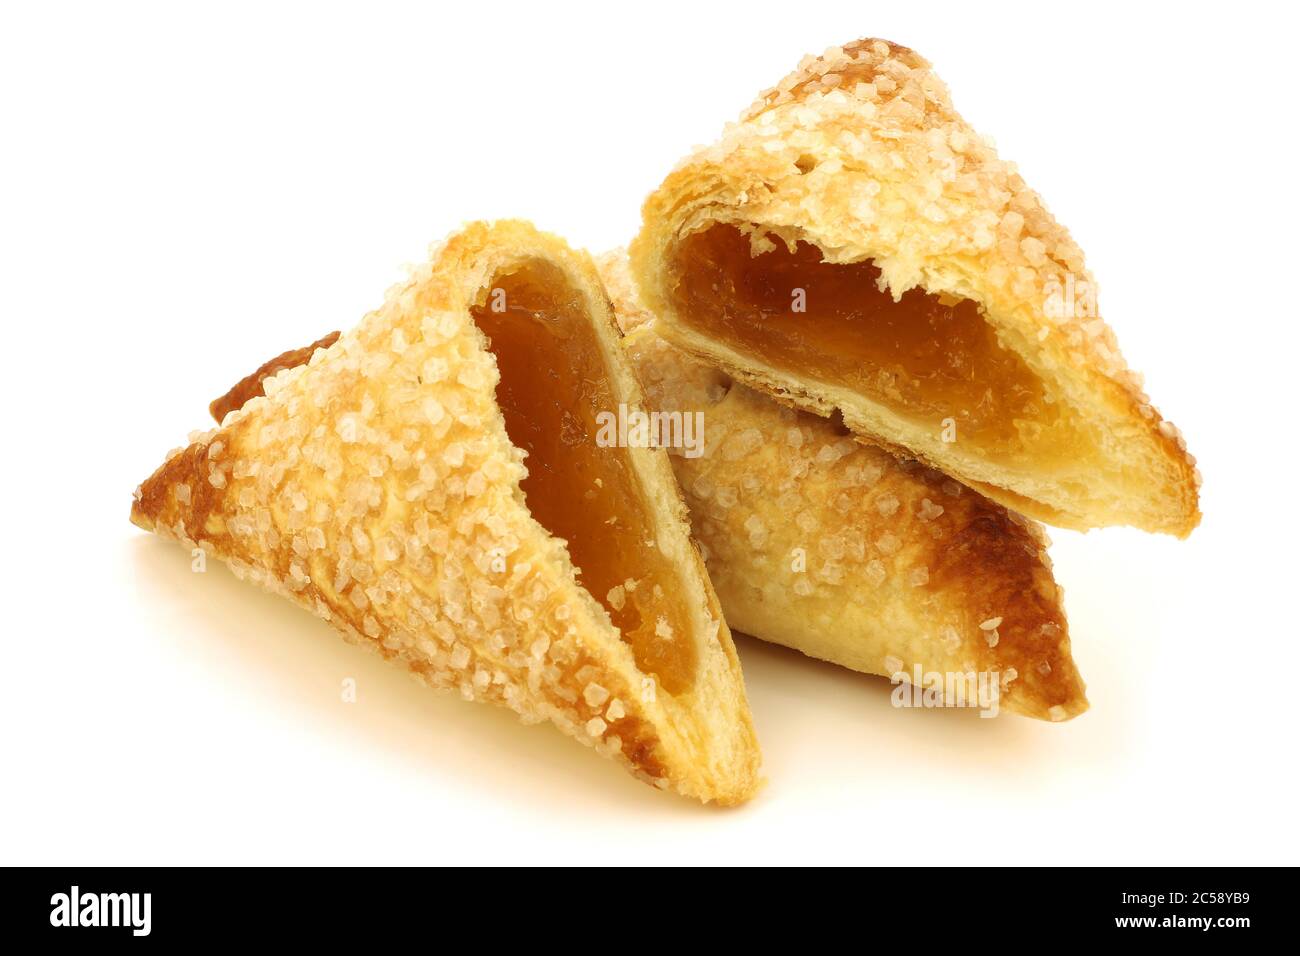 freshly baked apricot turnover and a cut one  on a white background Stock Photo